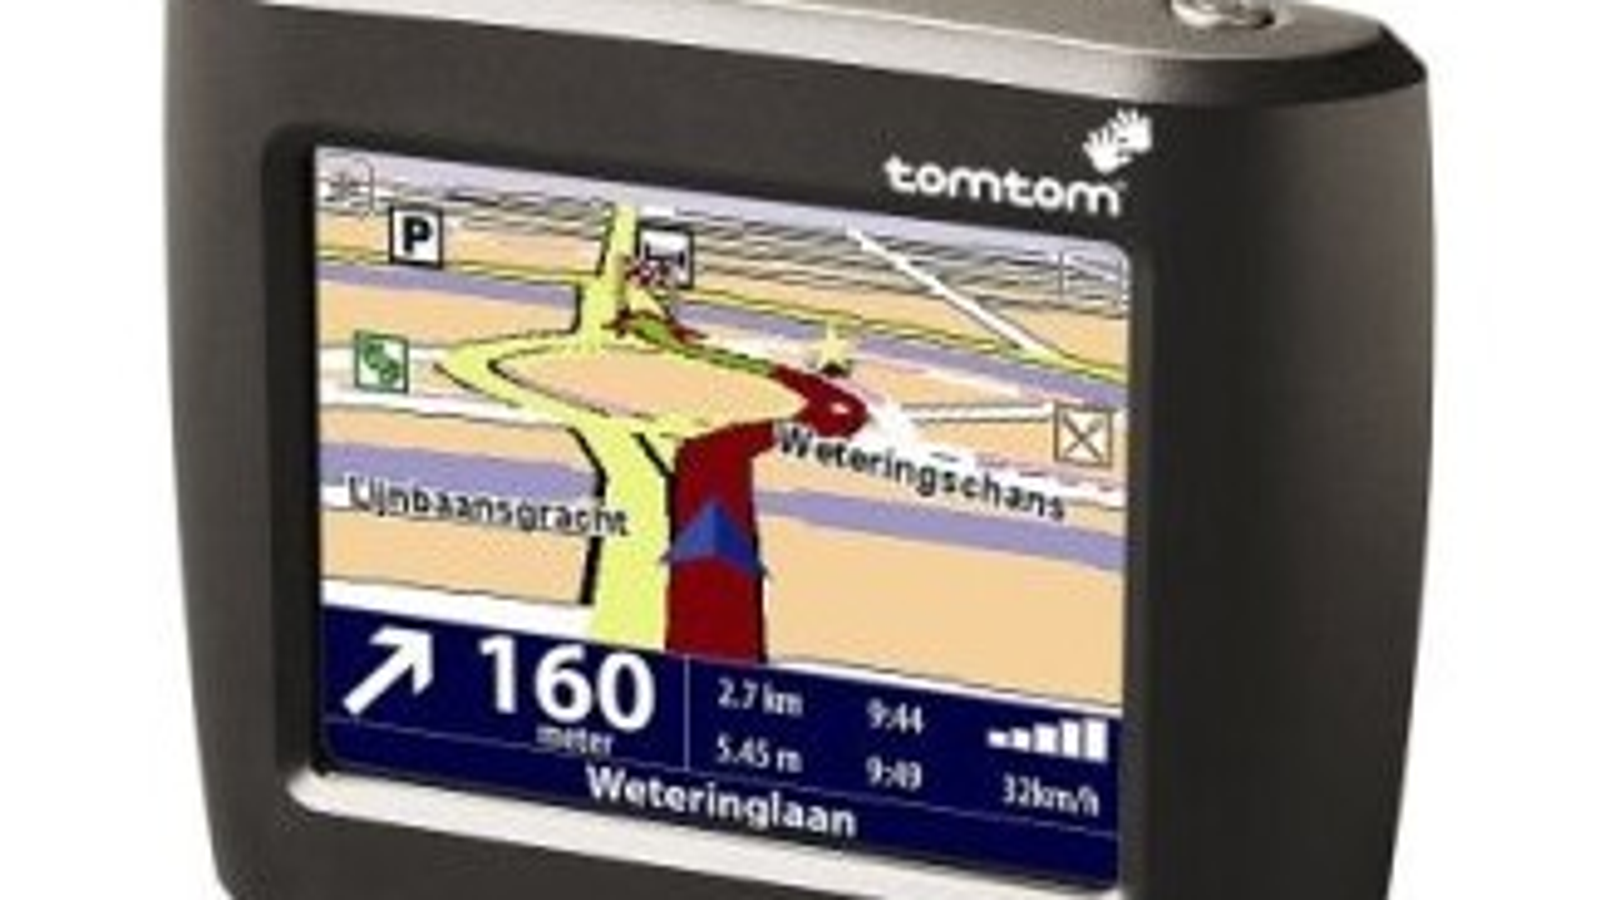 updates for tomtom one for free